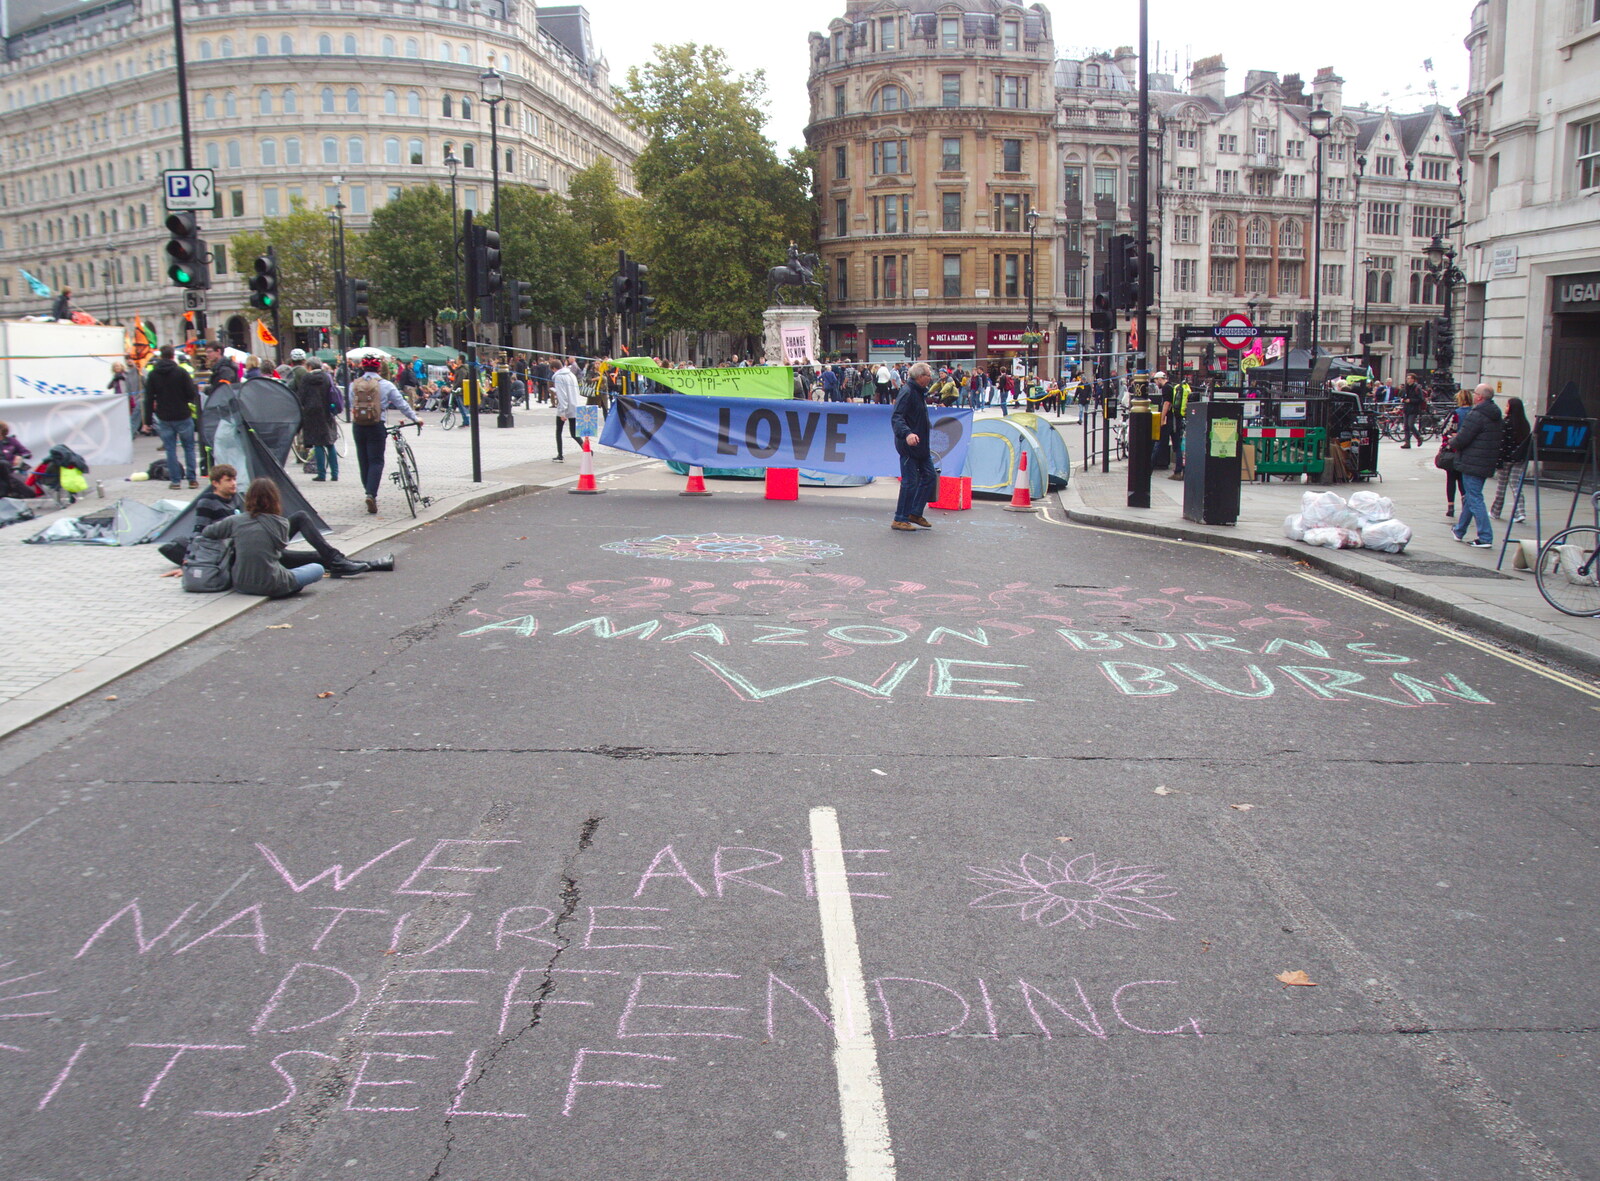 Some chalk-based protest statements from The Extinction Rebellion Protest, Westminster, London - 9th October 2019